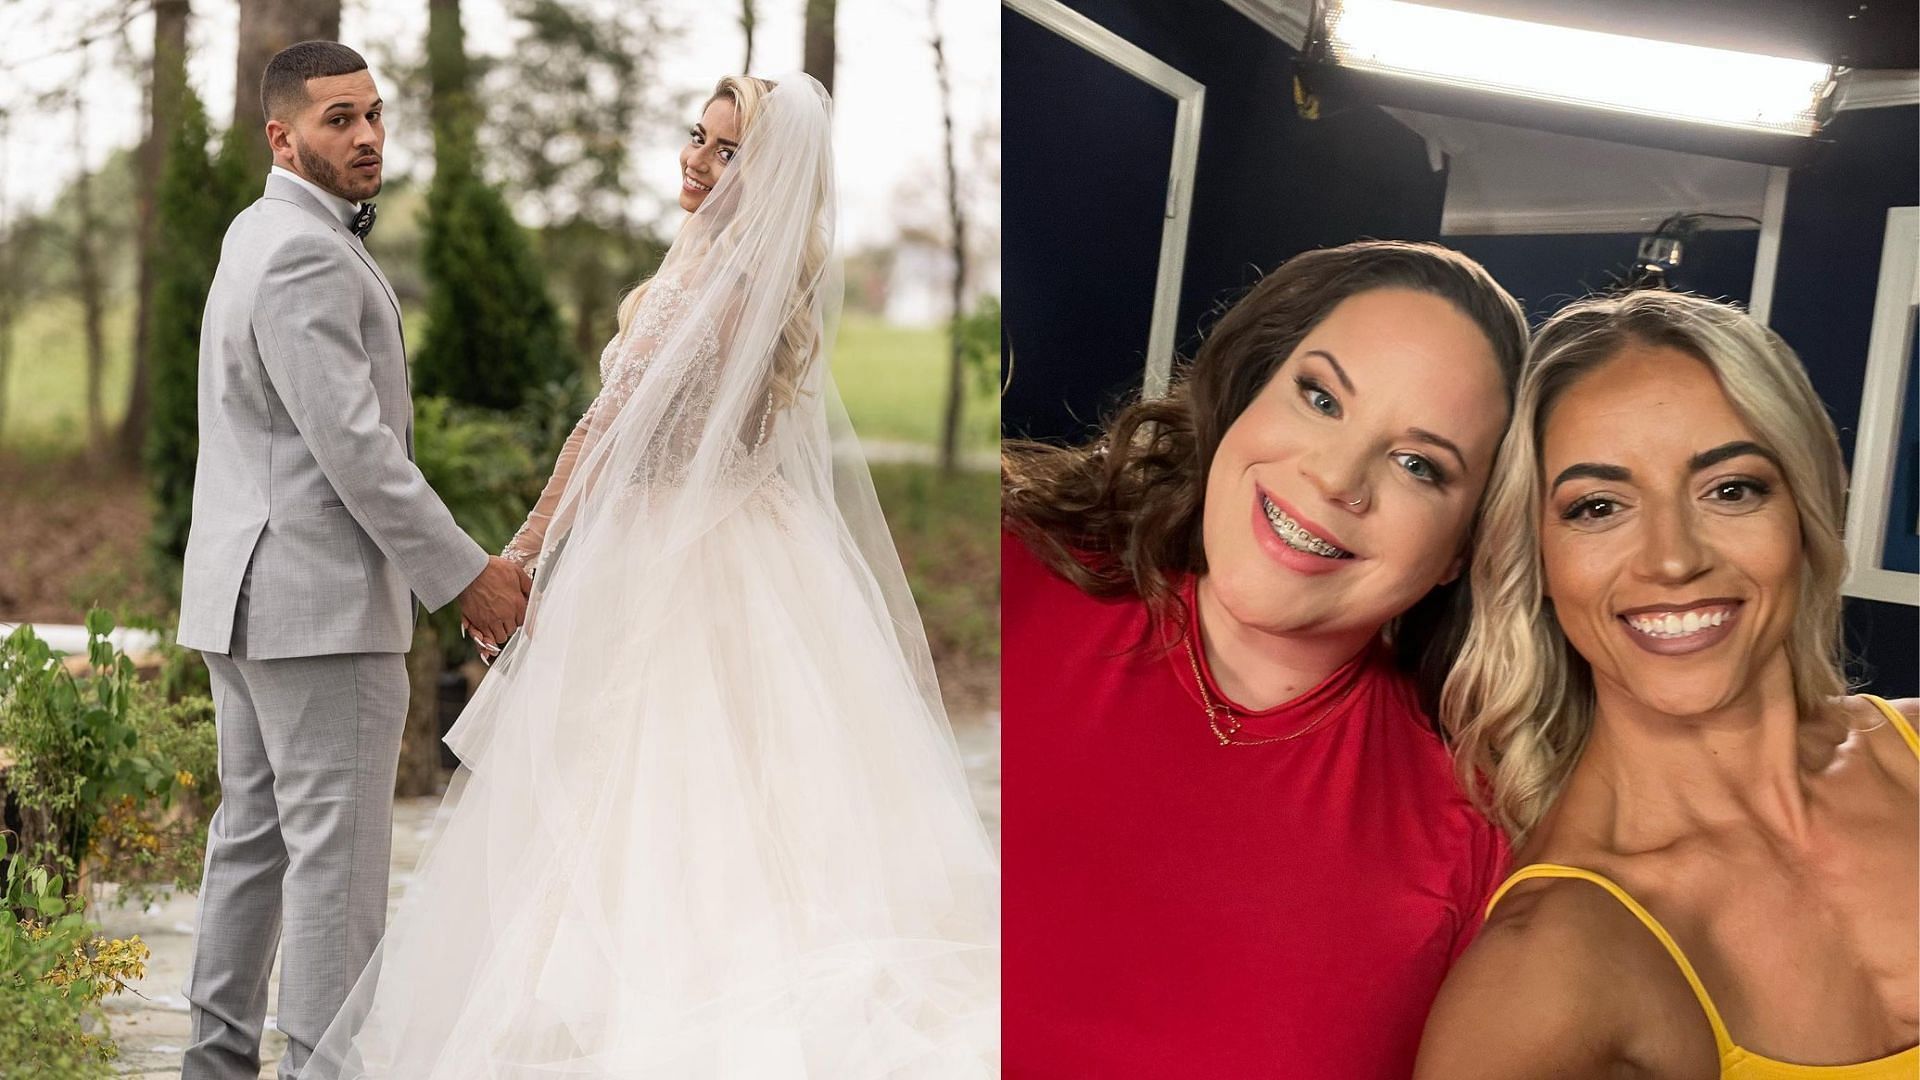 Jessica Powell to get married in the upcoming episode of My Big Fat Fabulous Life 